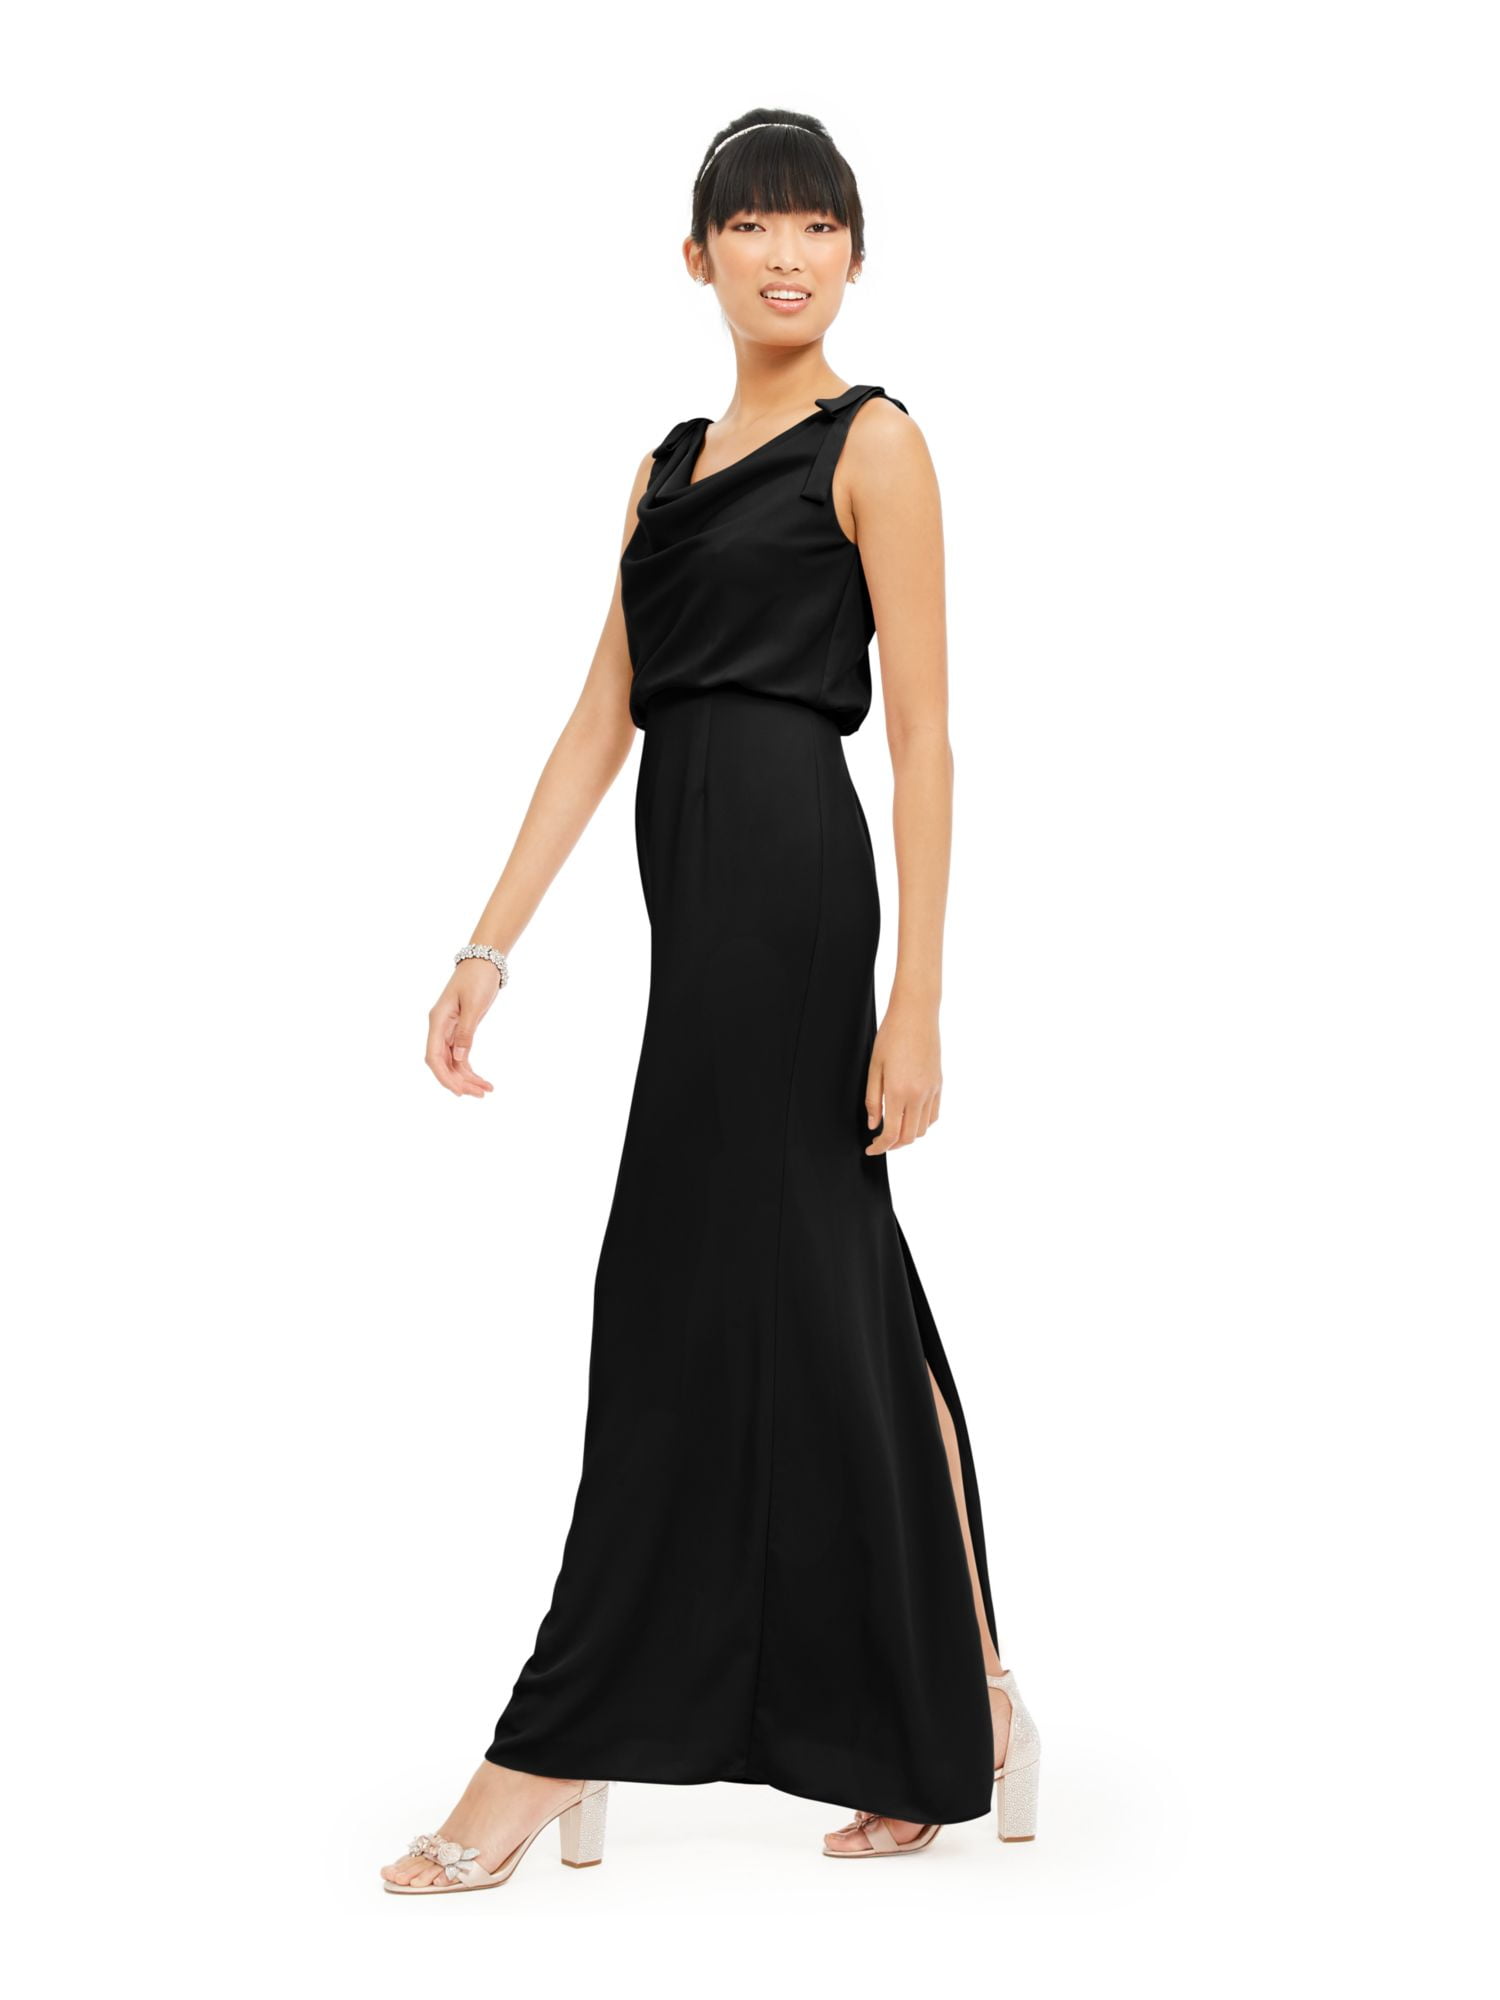 Black Color Straight Gown | Gowns, Silk gown, Curated outfit